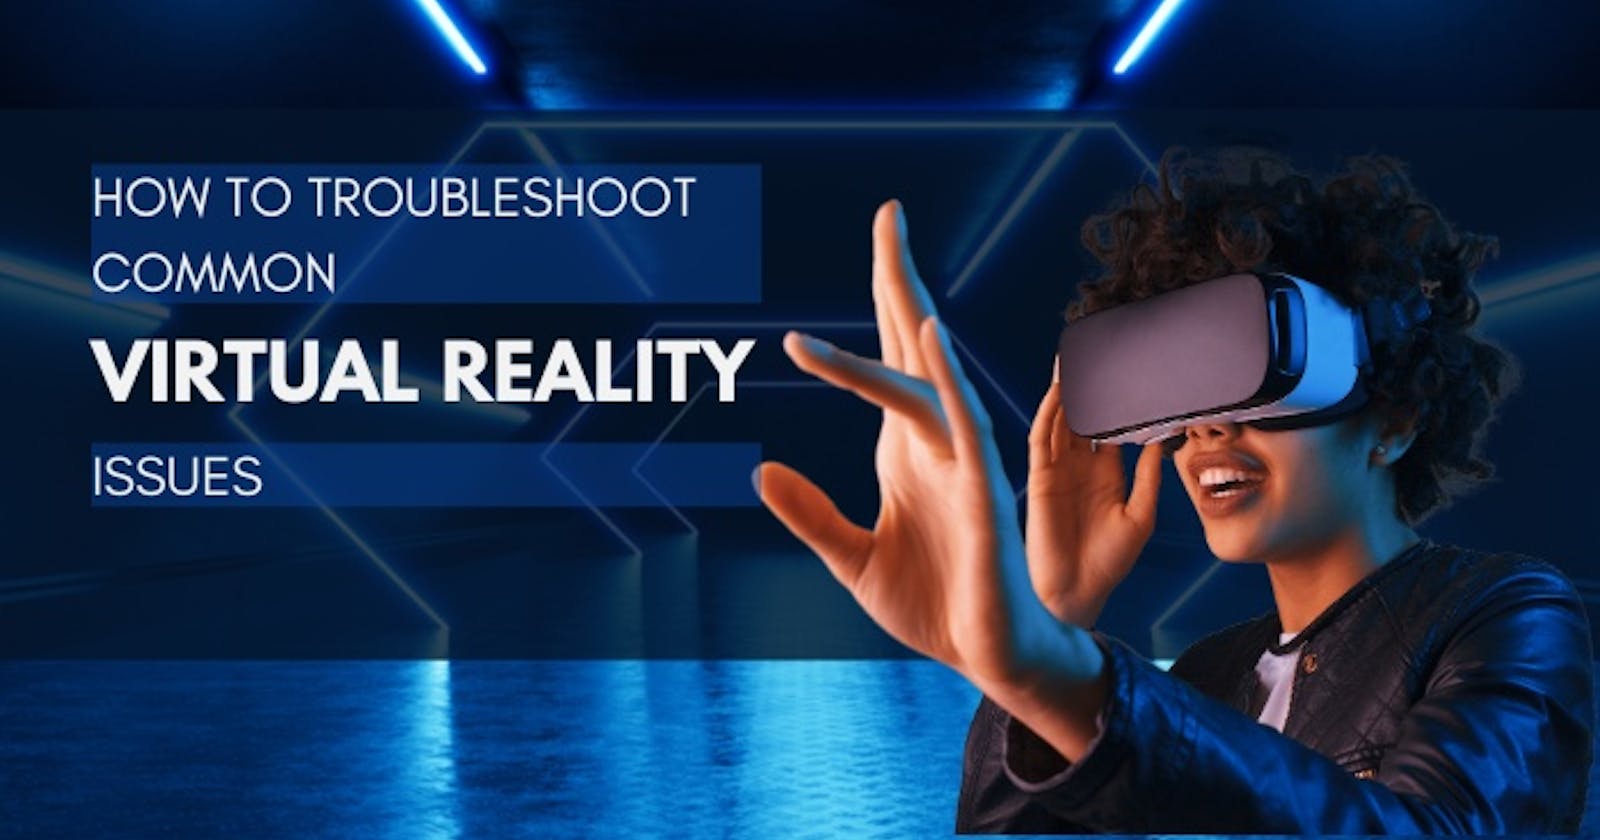 How to Troubleshoot Common Virtual Reality Issues